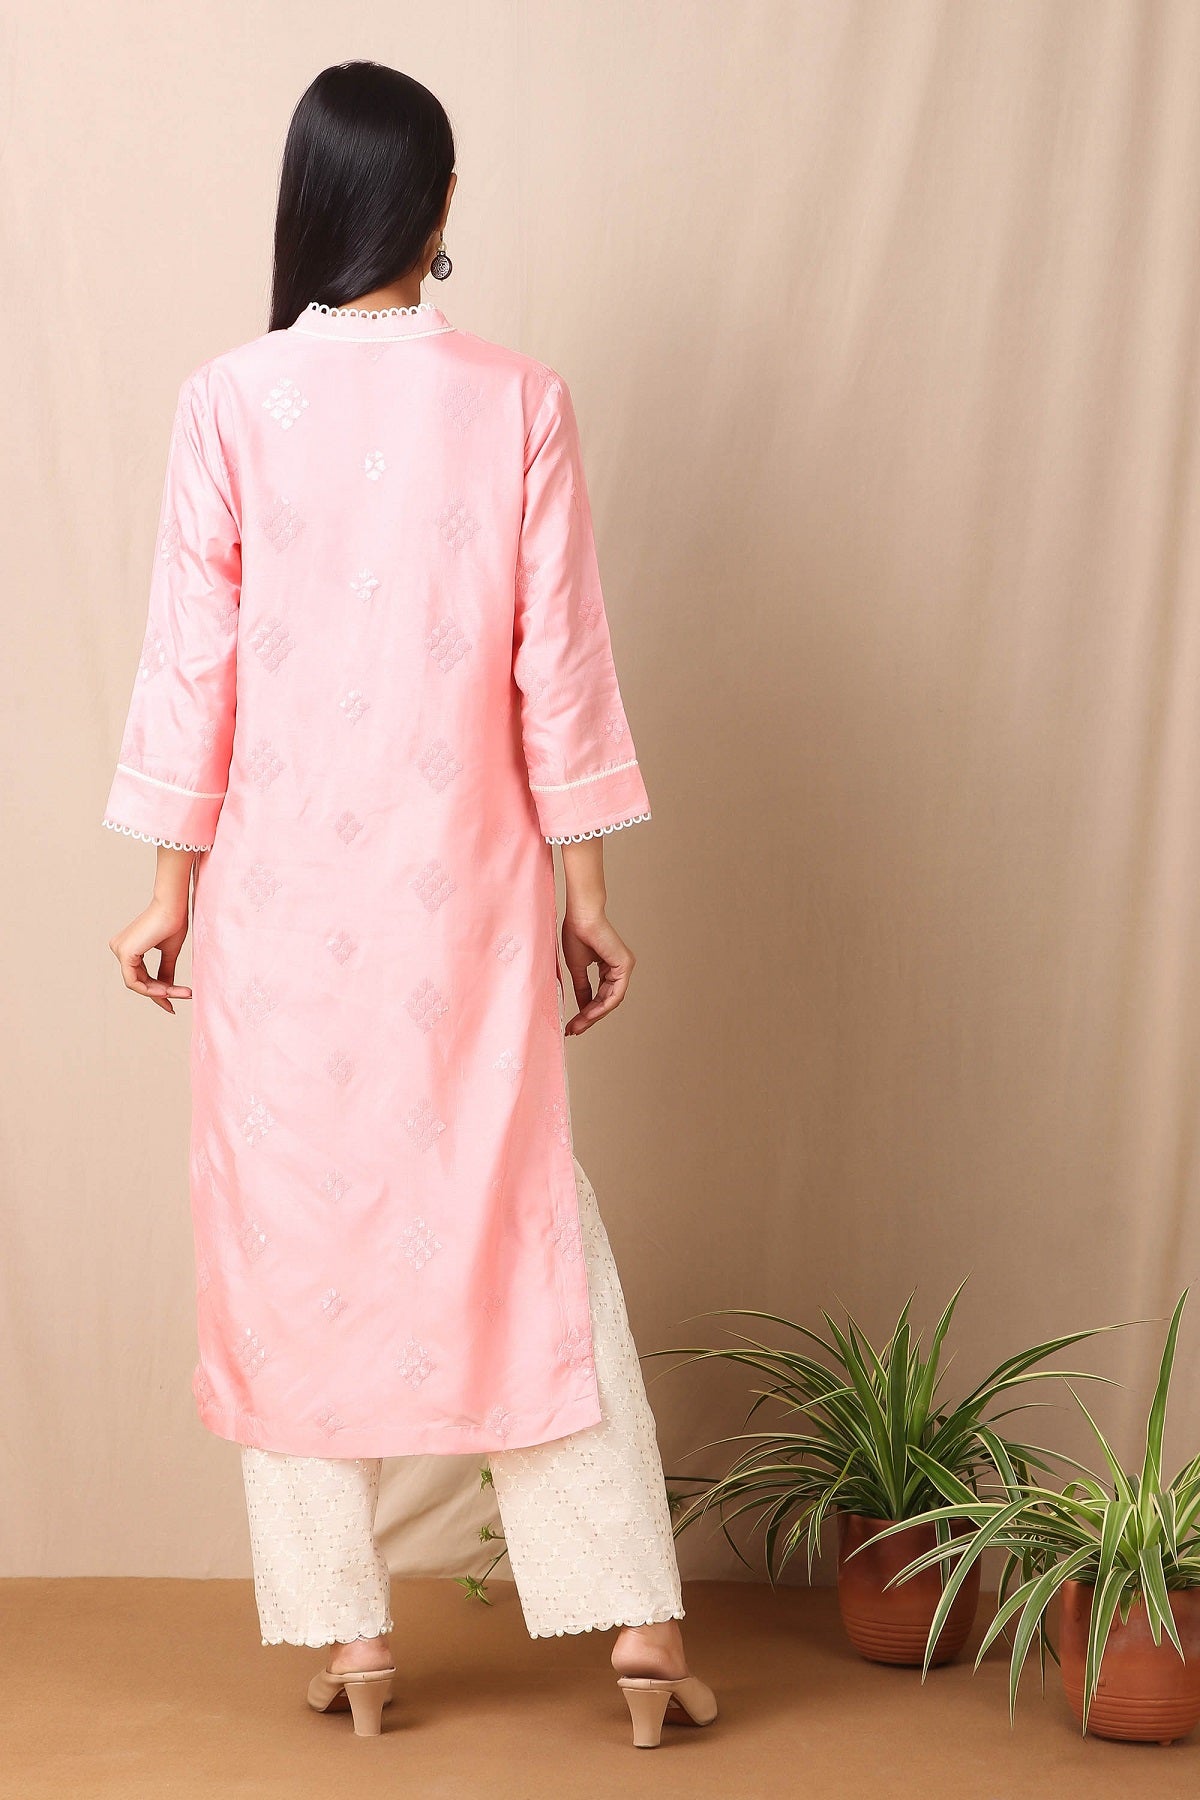 Shop beautiful set of pink upadda silk kurta with tonal sequins motifs and lace around the neckline with beautiful tassels on it and cotton stretch white pant from Pure Elegance. Complete the look by wearing statement jewellery and heels. Light up your ethnic collection of clothing with this kurta cotton white pant set from Pure elegance.  Pair it up with statement jewellery to complete your look from Pure Elegance Indian clothing store in USA online now.-Back view.